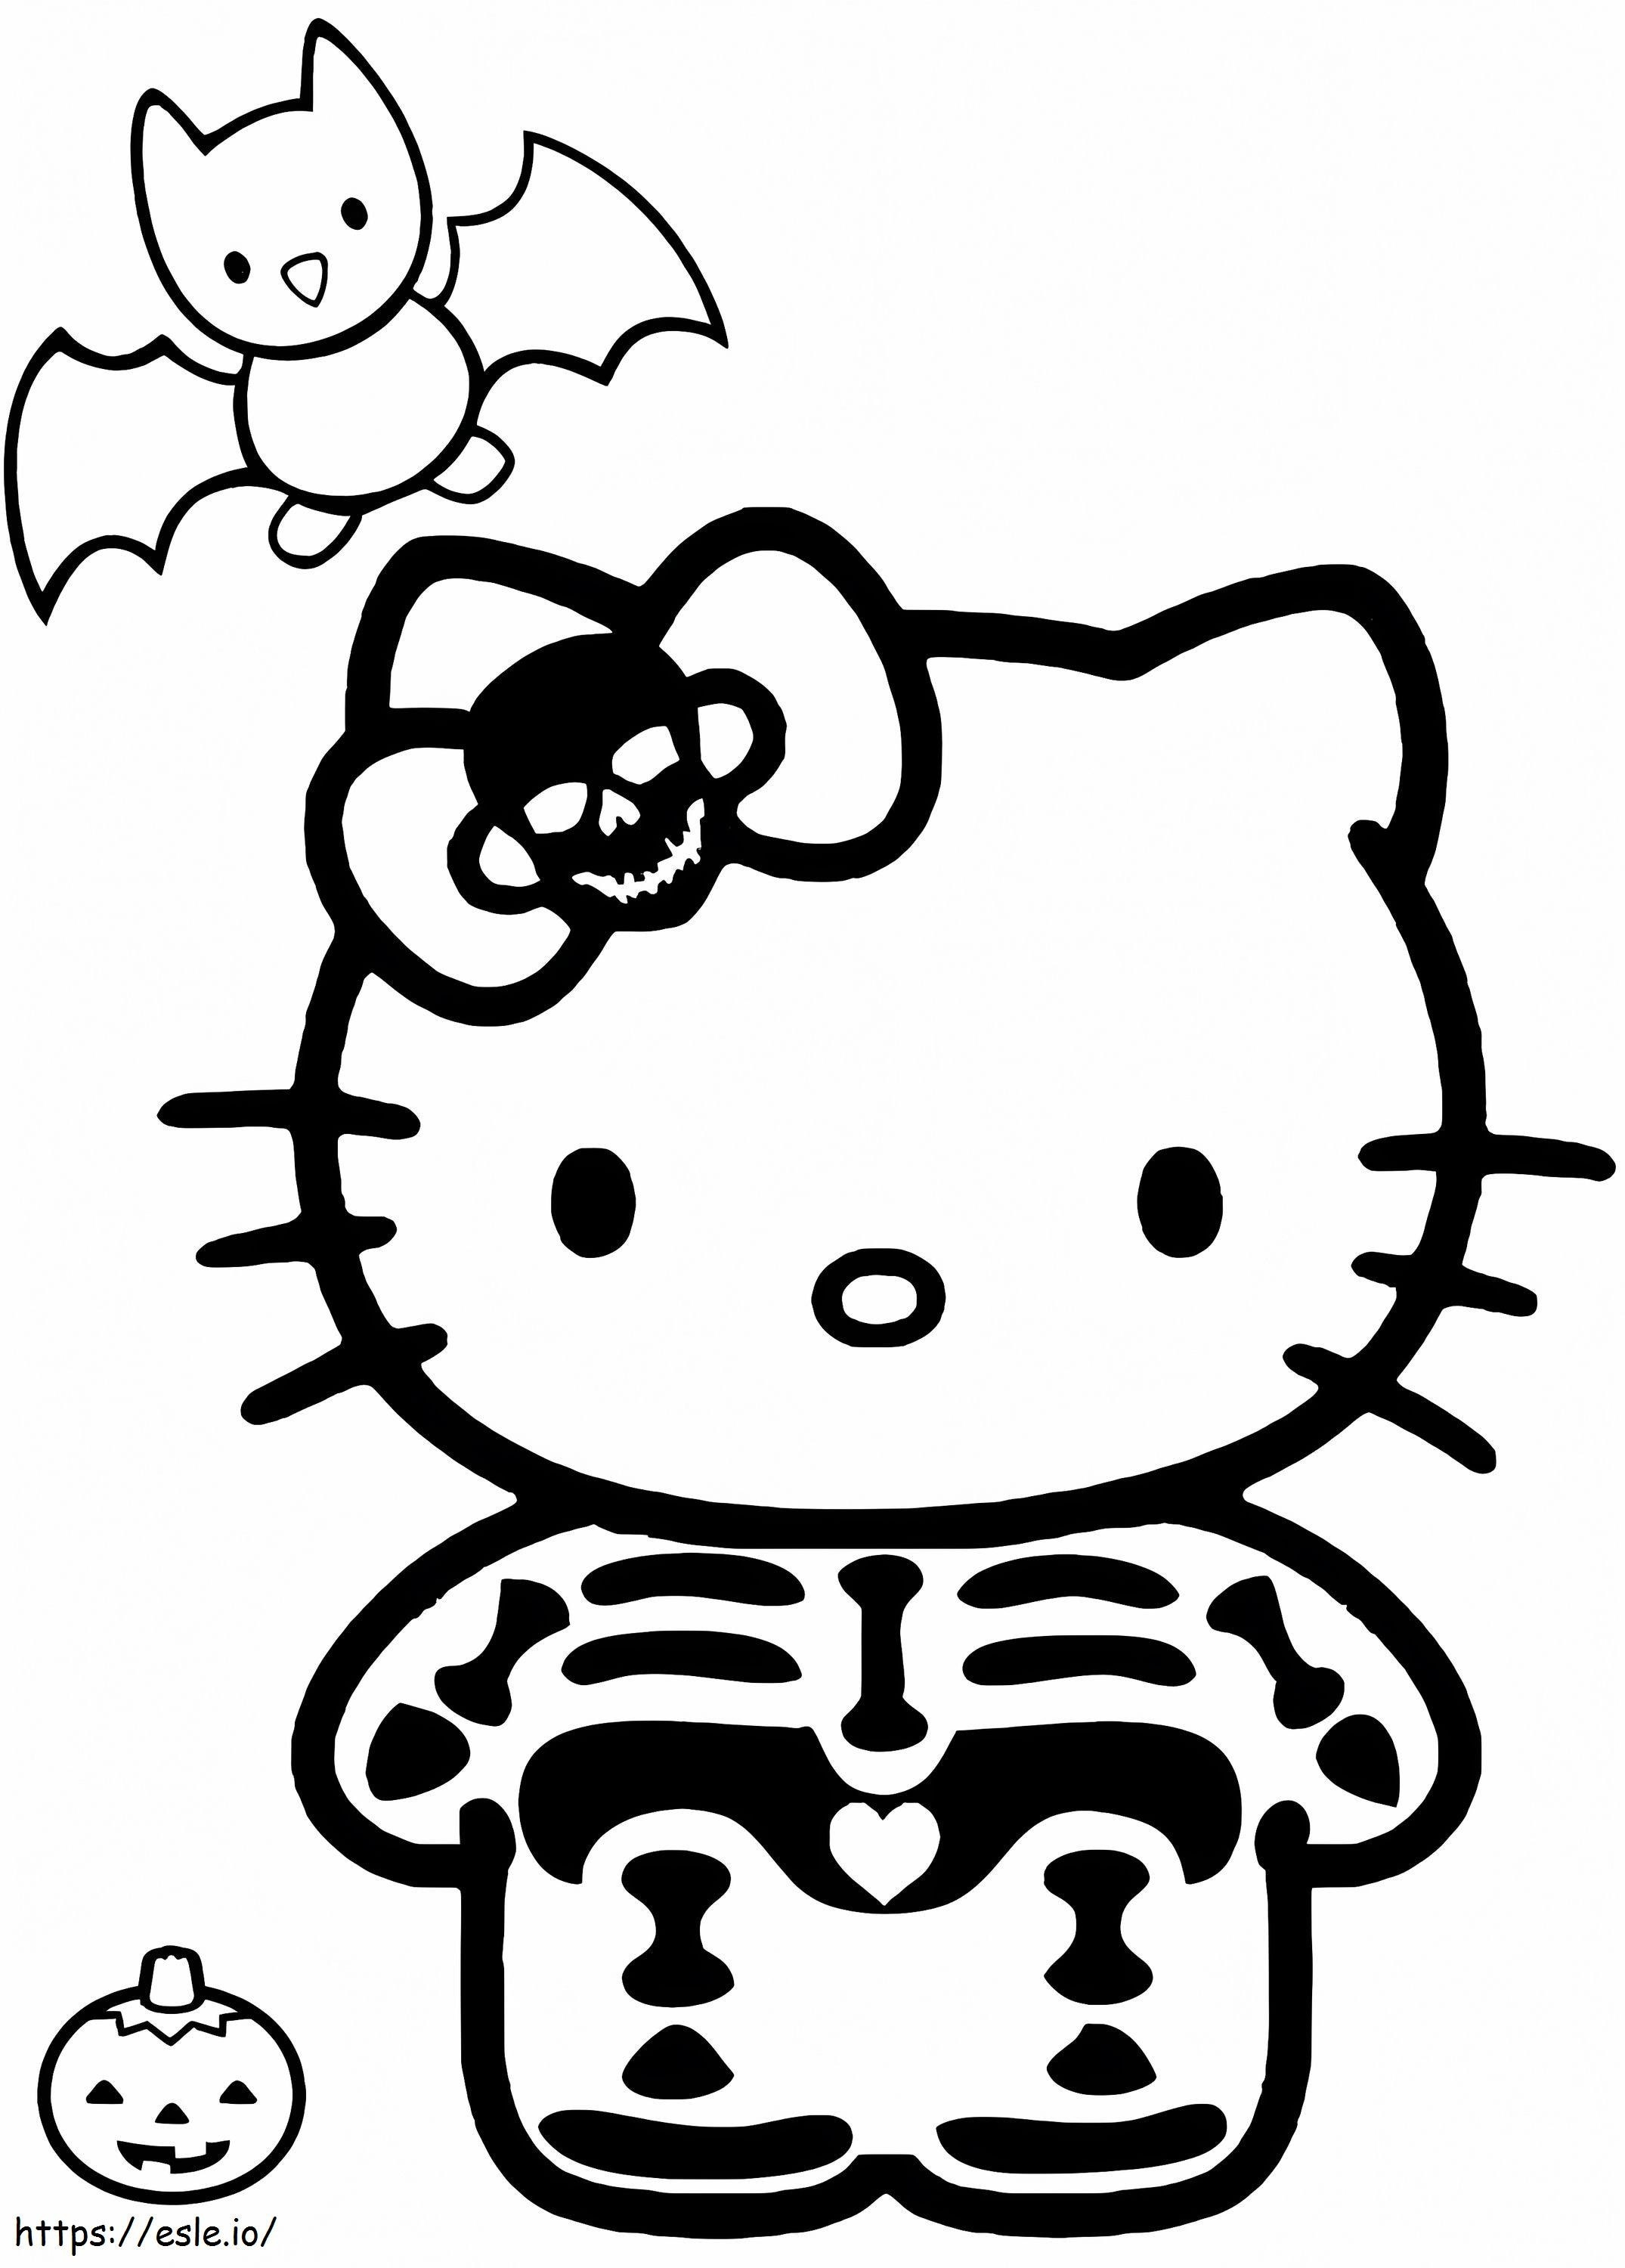 Halloween Hello Kitty coloring page